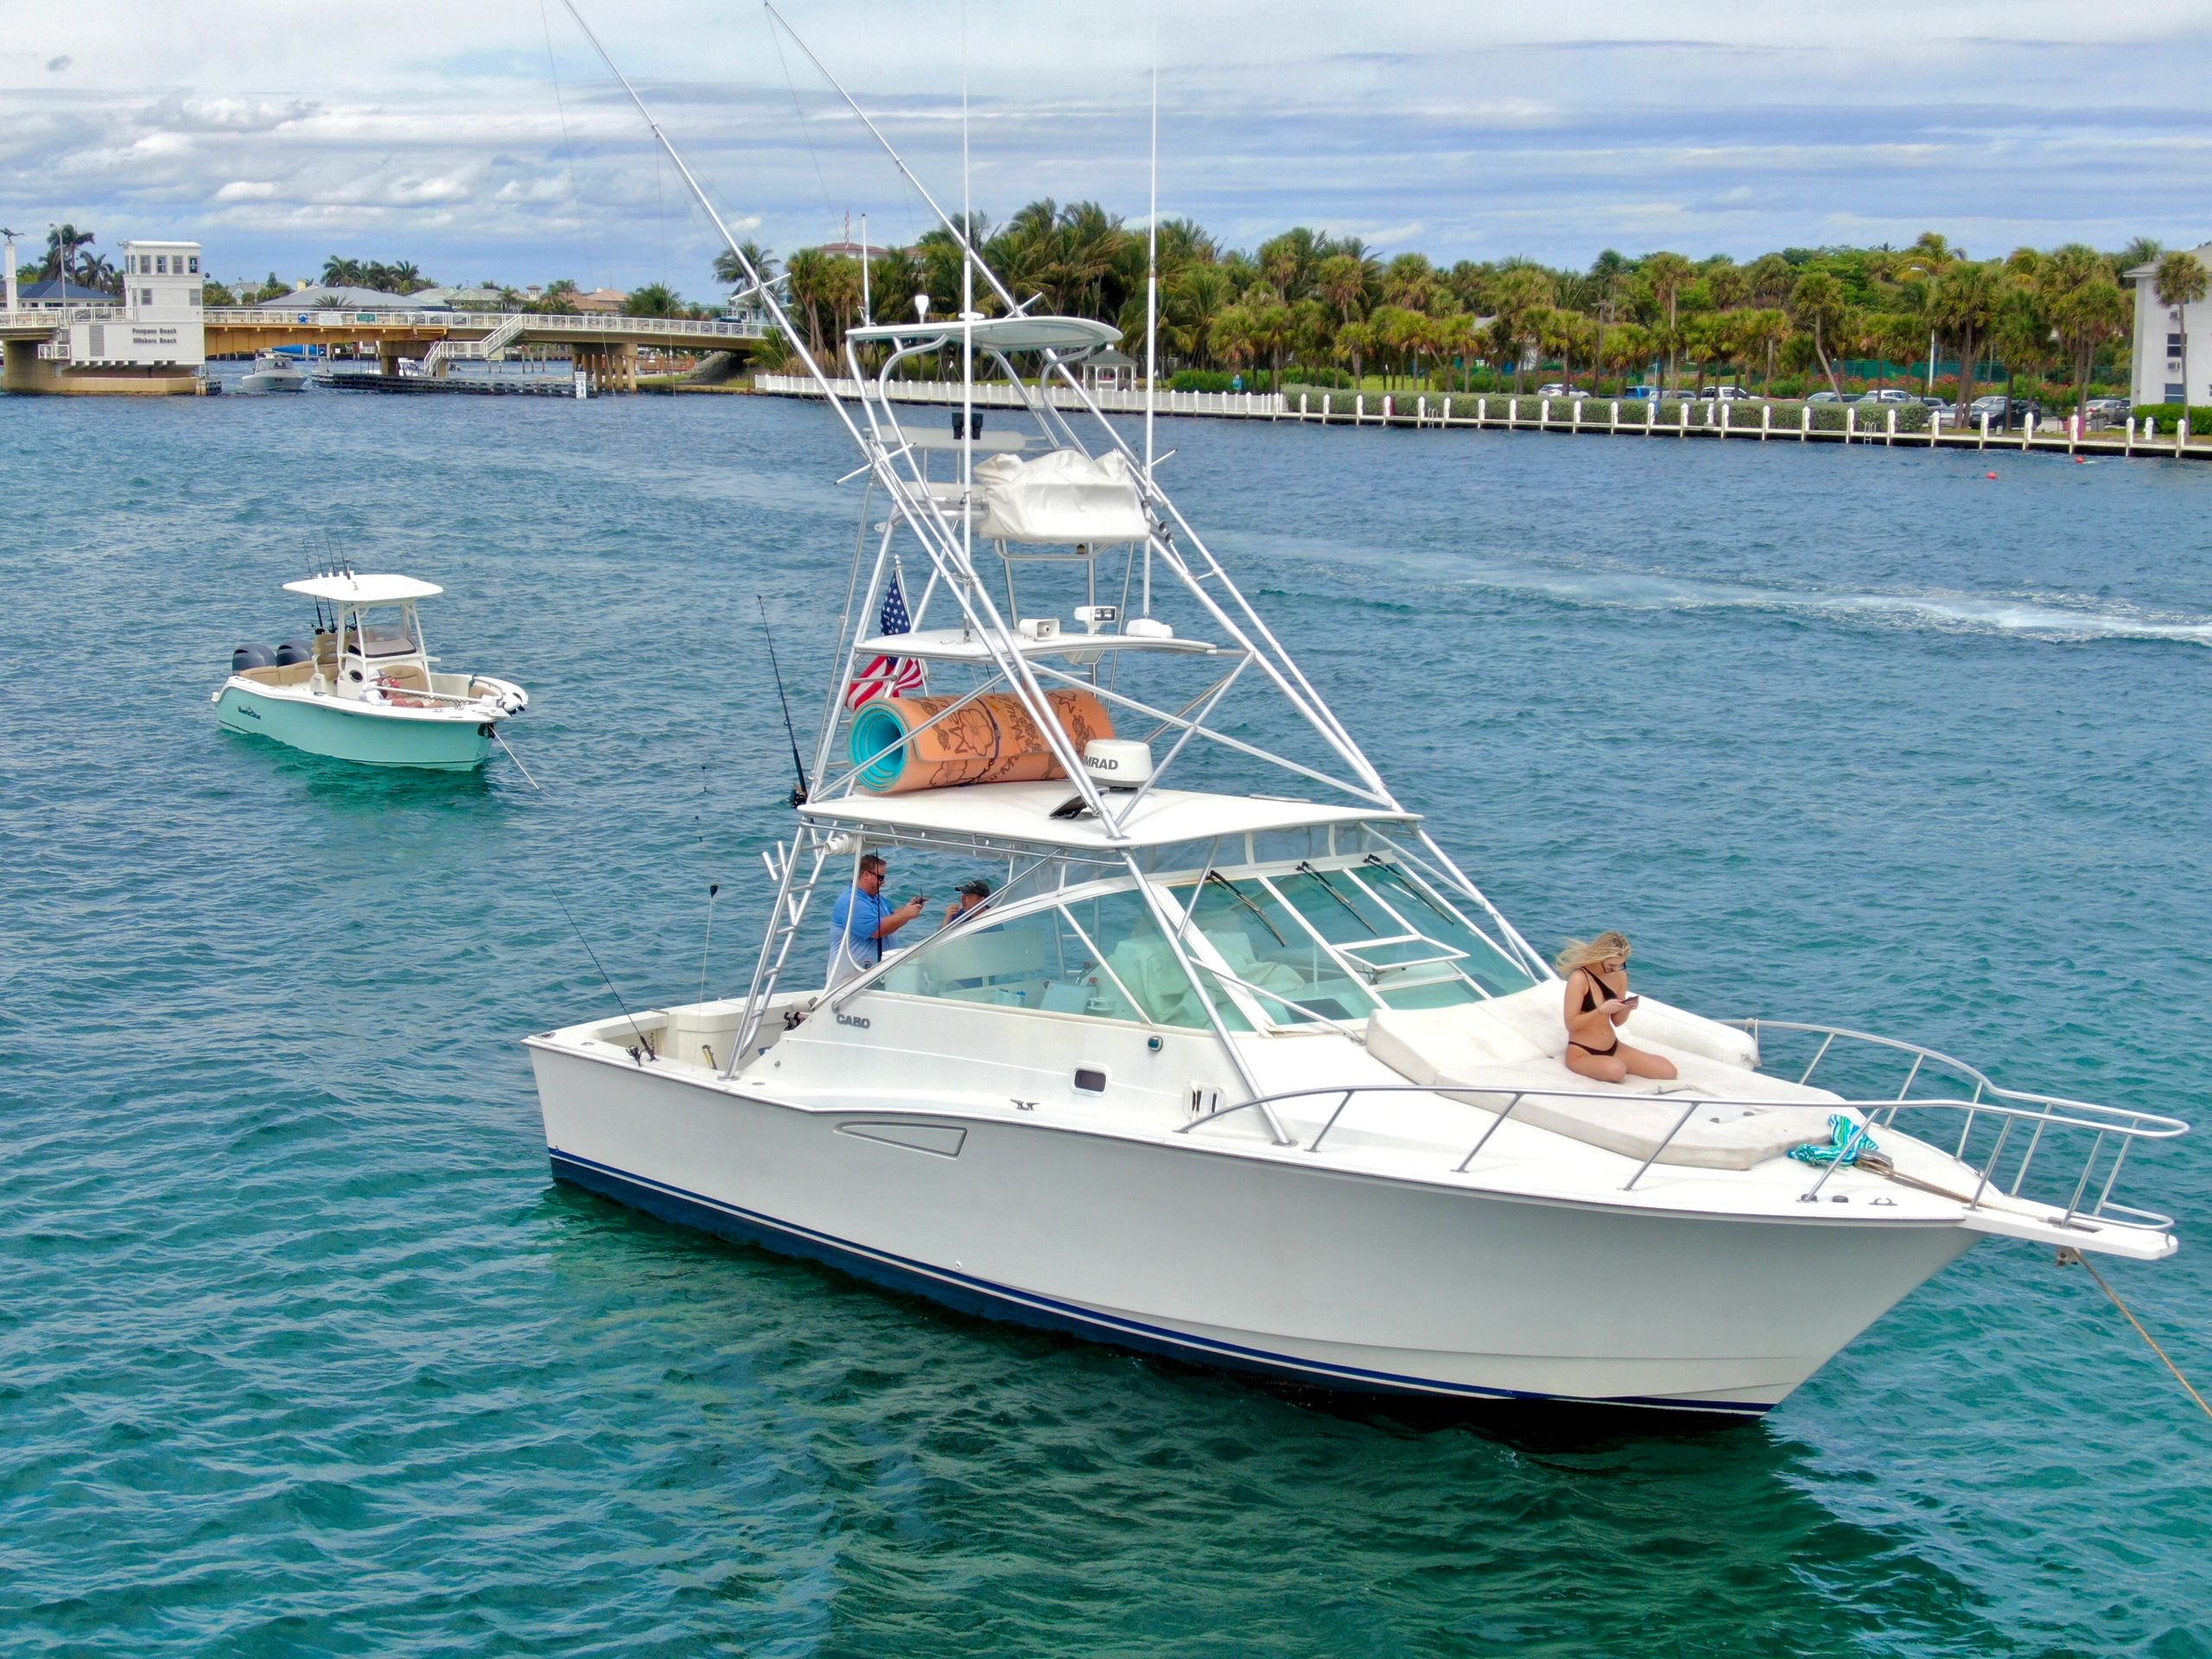 island oasis, day charter, pompano day charter, pompano day cruise, offshore, 4 or 6 hour cruise